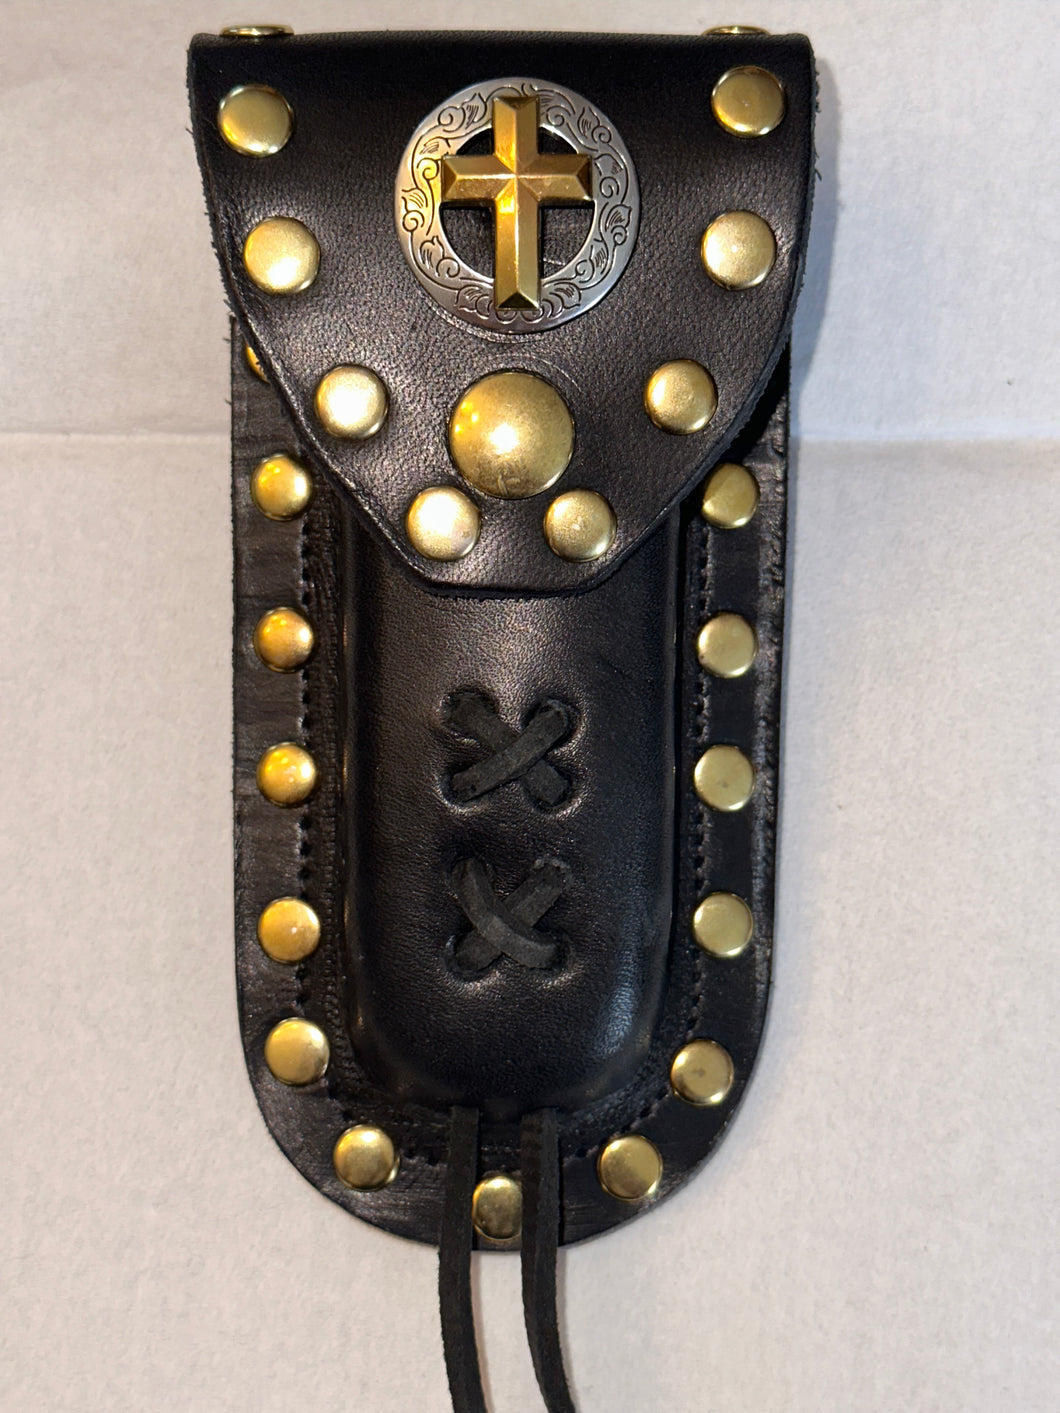 Buck 110 Leather Knife Case -  Gold Cross with Silver Field (Black)